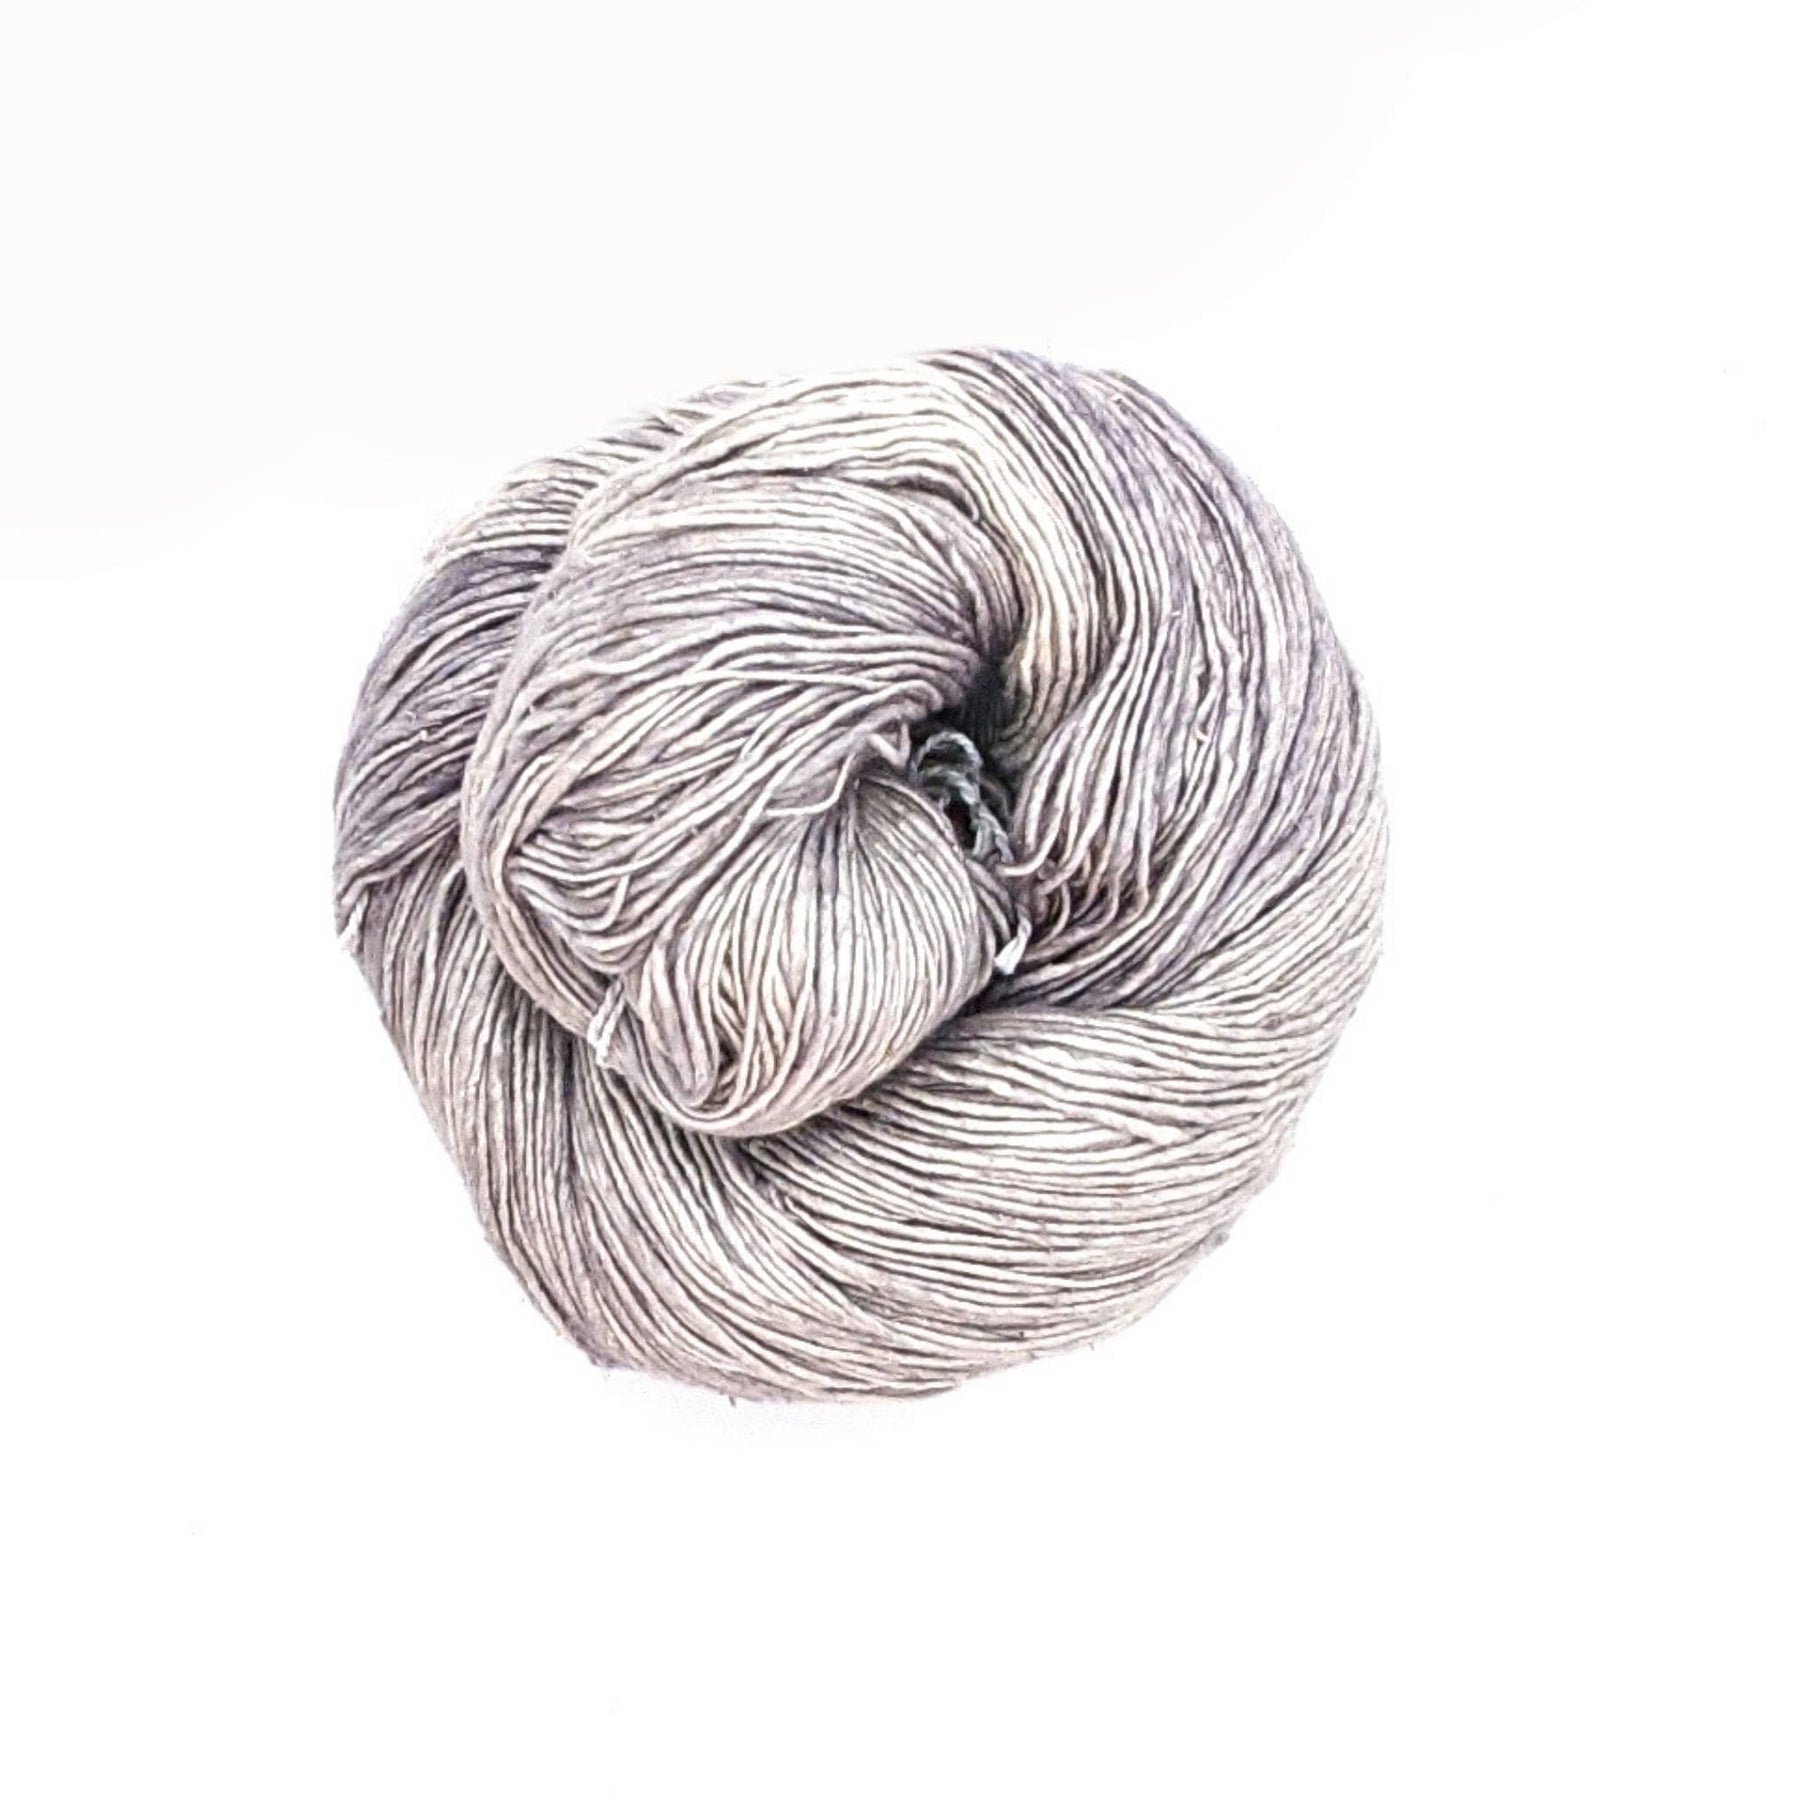 Lace Weight 100% Recycled Silk Yarn - Ultimate Grey